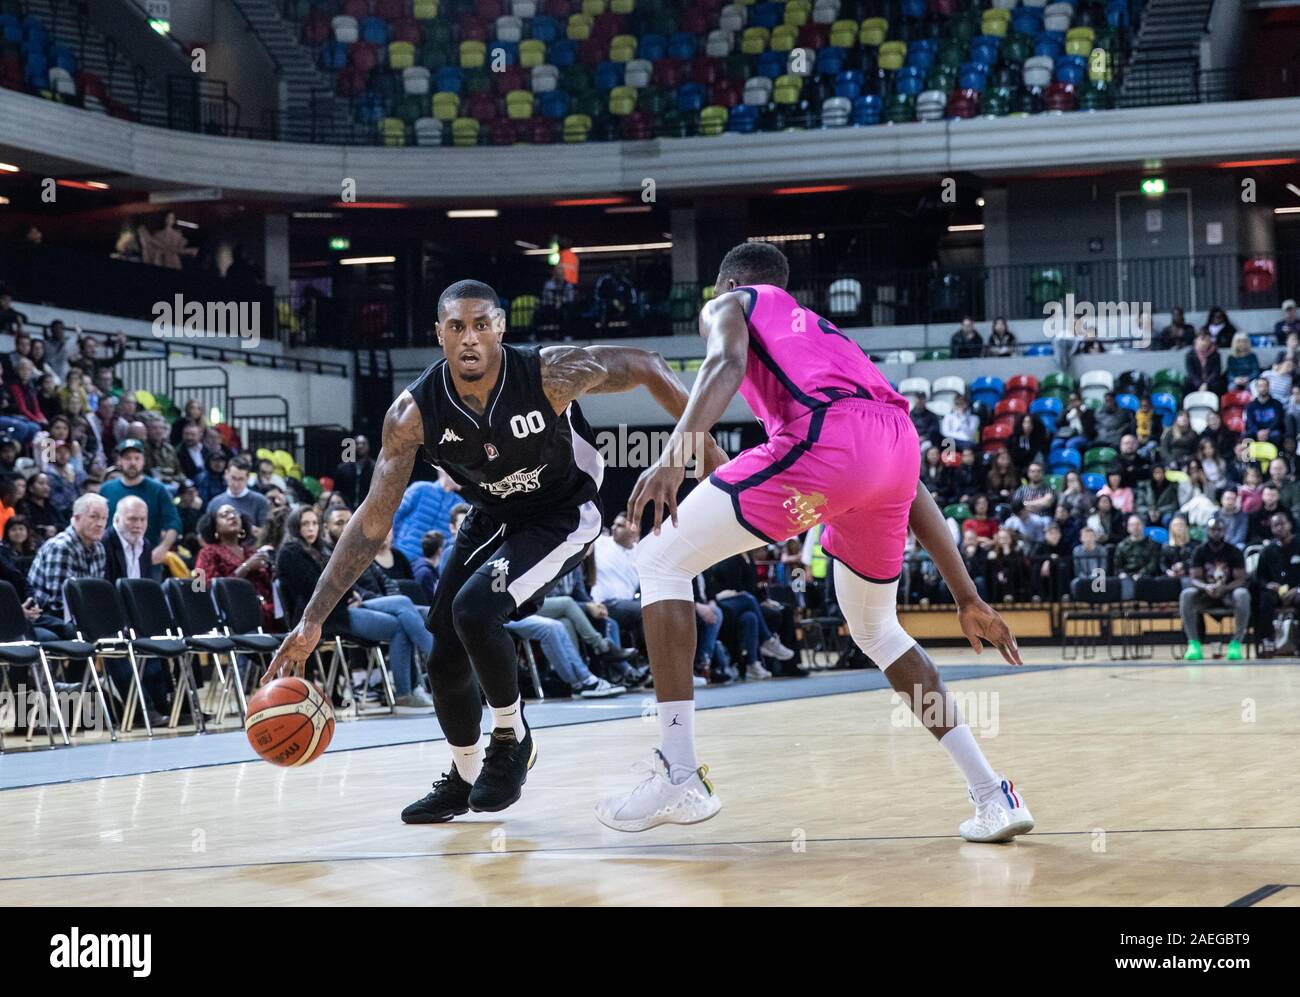 London, UK, 8th December 2019. Ovie Soko makes his debut playing for London Lions basketball team. The Lions defeated the Glasgow Rocks 88-72 in their opening match of the BBL Championship 2019. copyright Carol Moir. Stock Photo